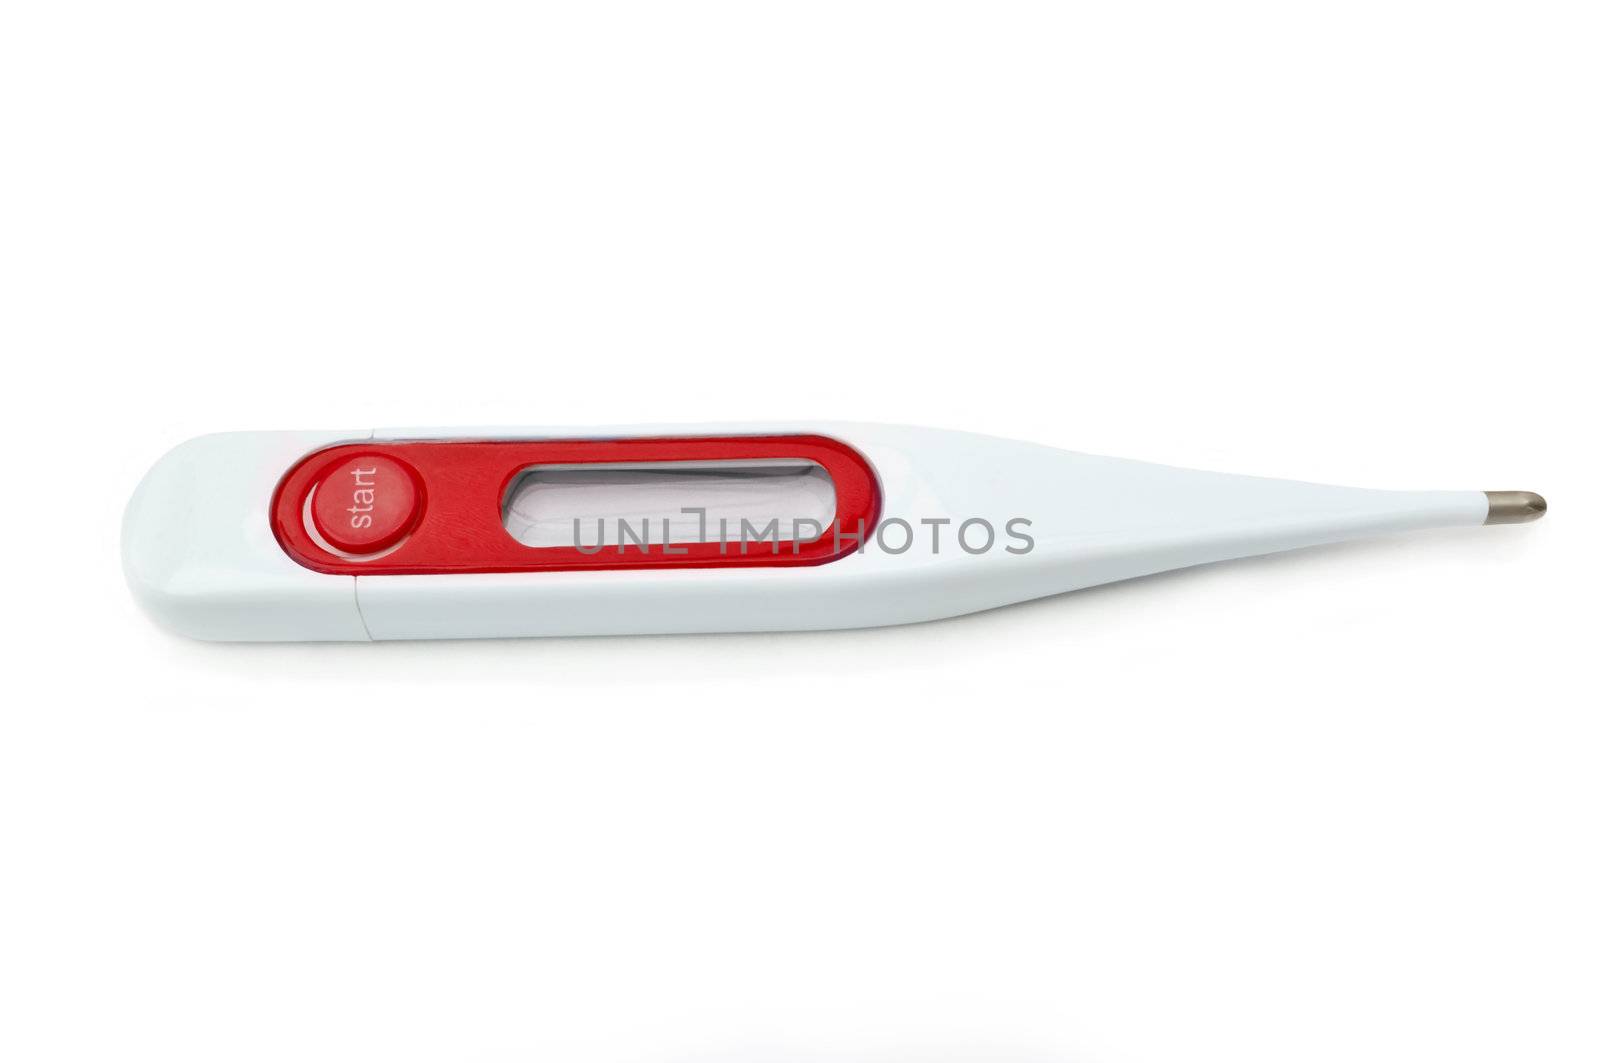 A single red and white plastic digital thermometer with blank display arranged over white